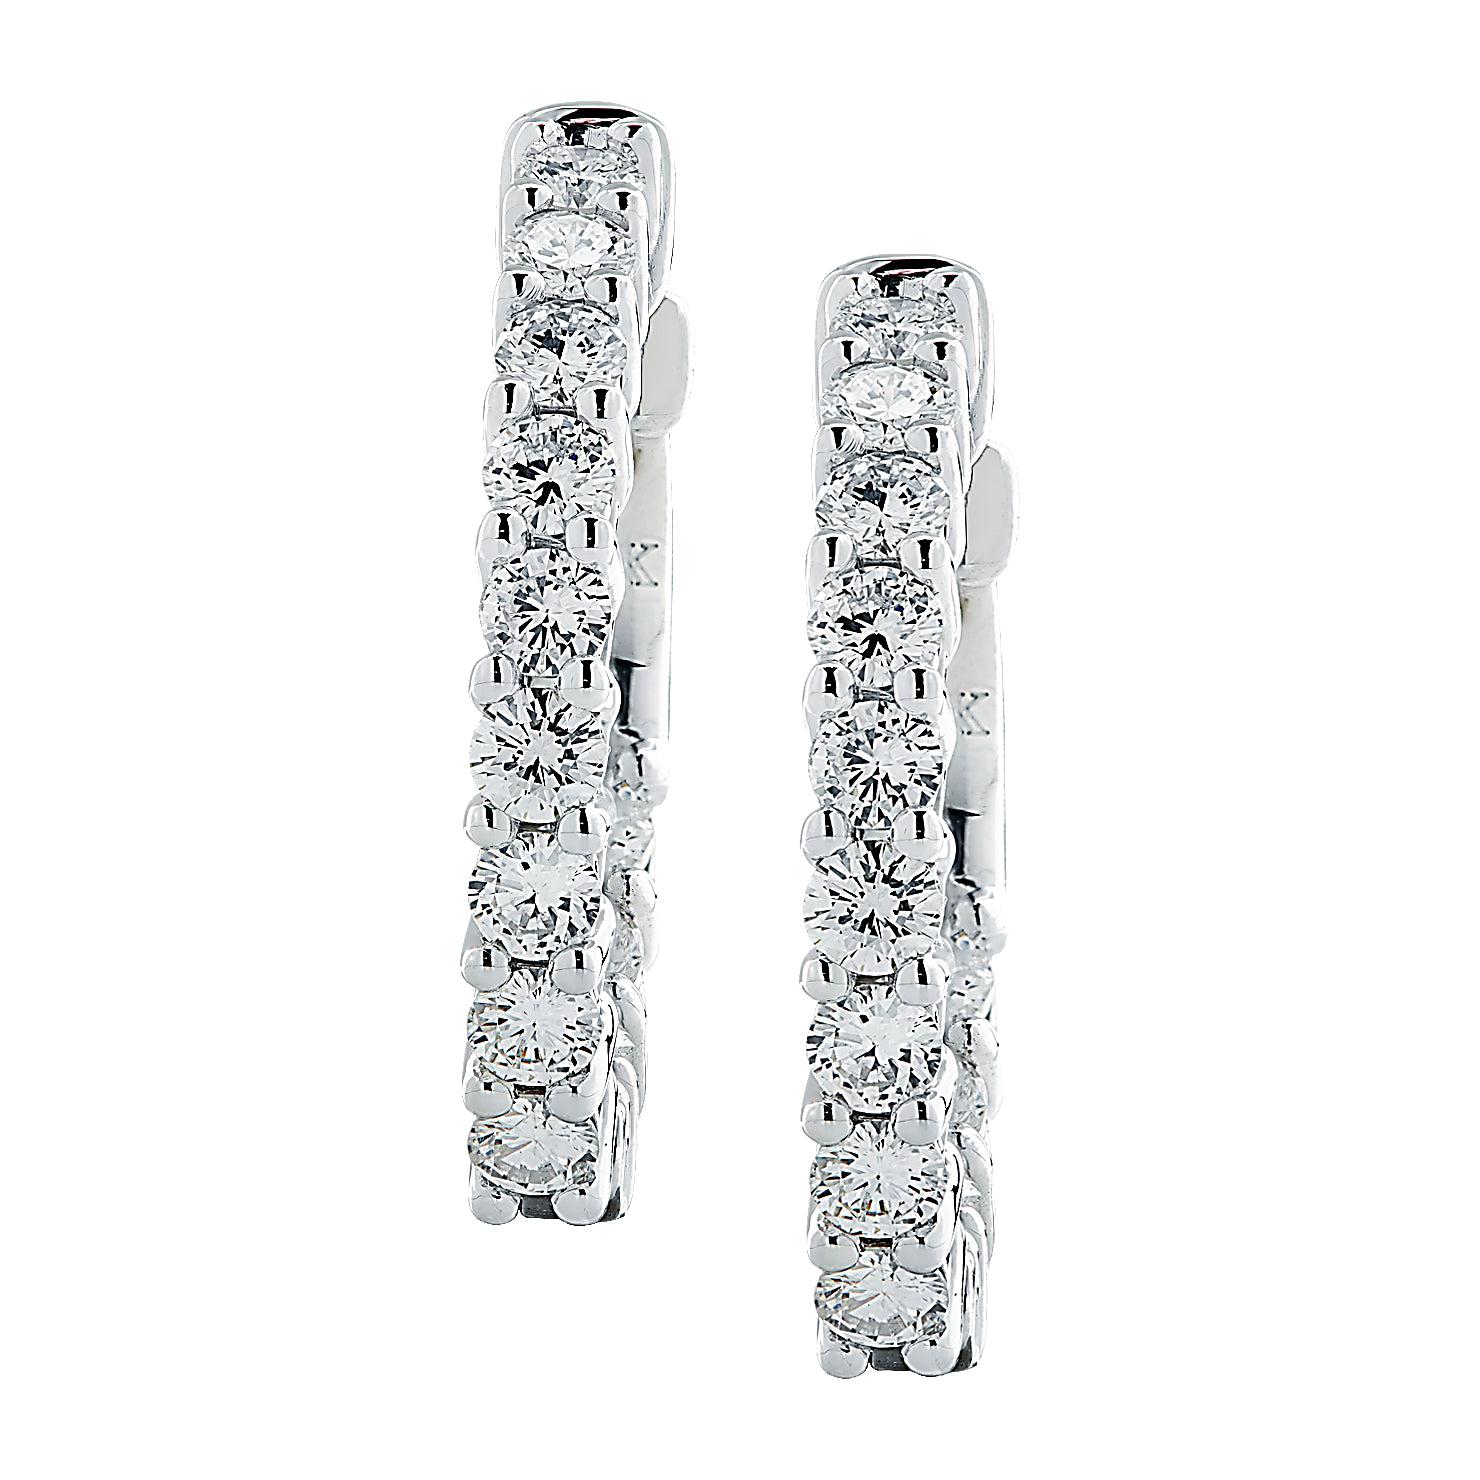 Vivid Diamonds In and Out 1.57 Carat Diamond Hoops